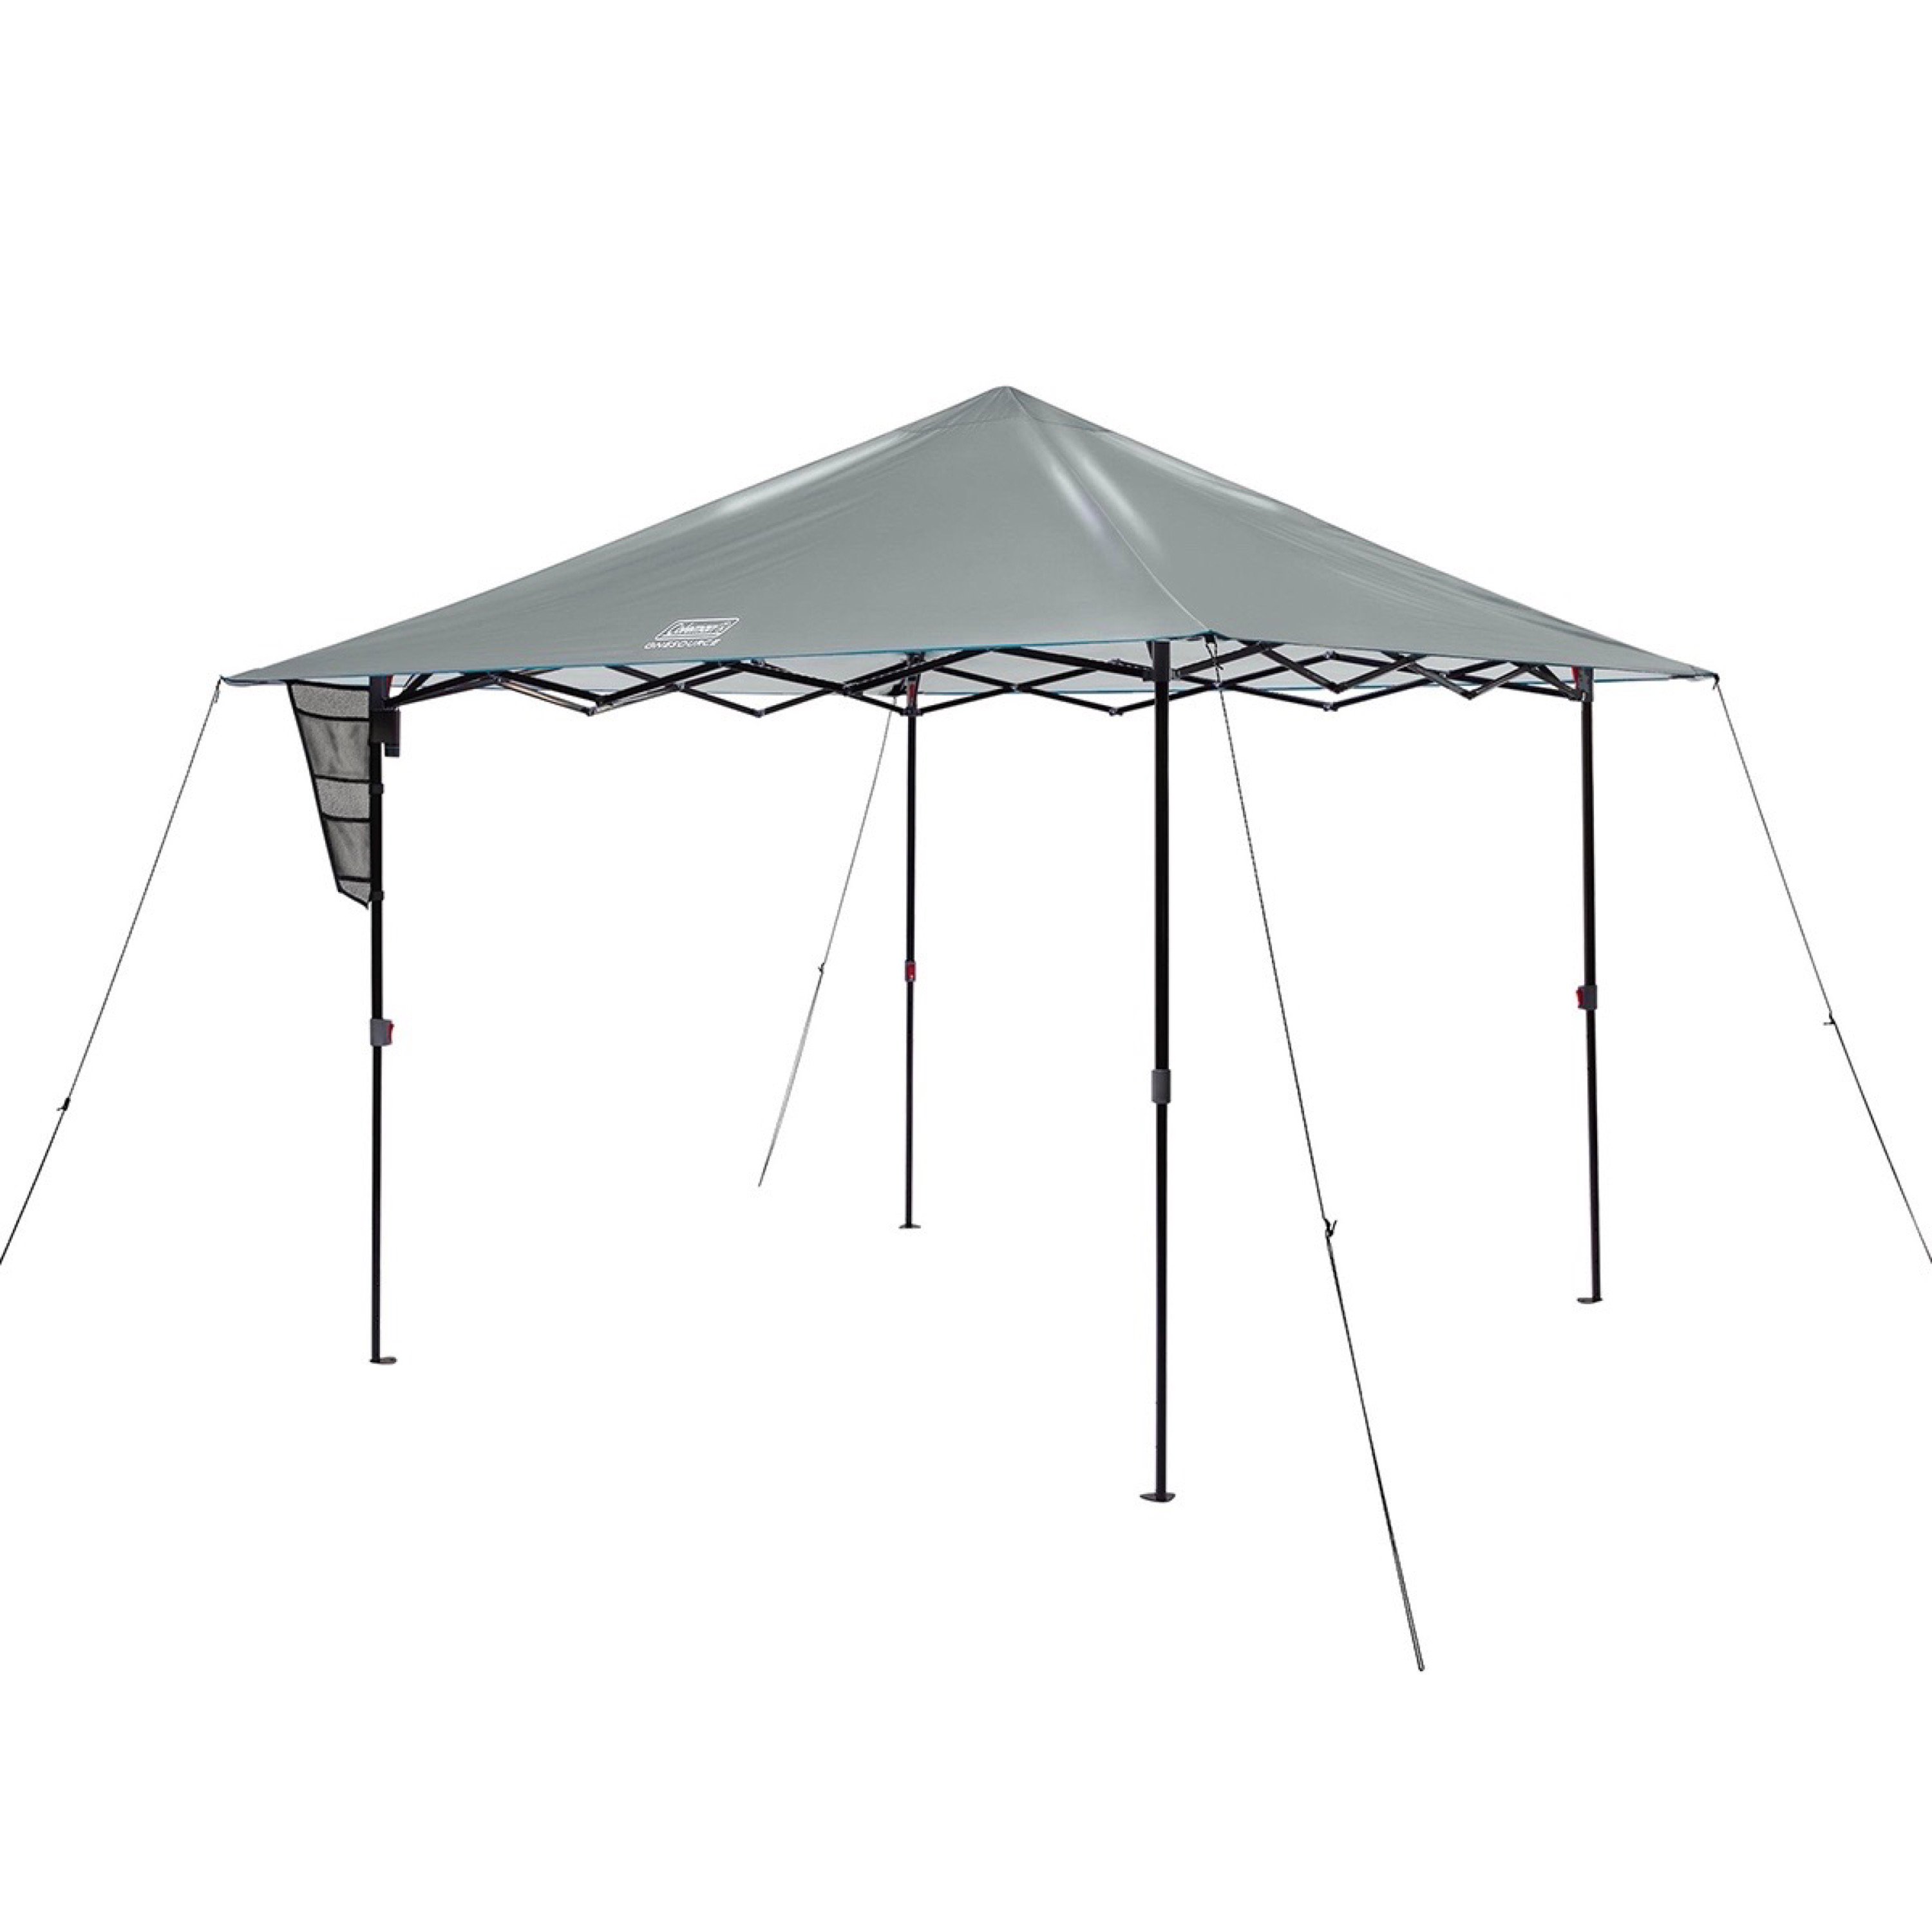 MP Steward Håbefuld OneSource™ 10 x 10 Canopy Shelter with LED Lighting & Rechargeable Battery  | Coleman